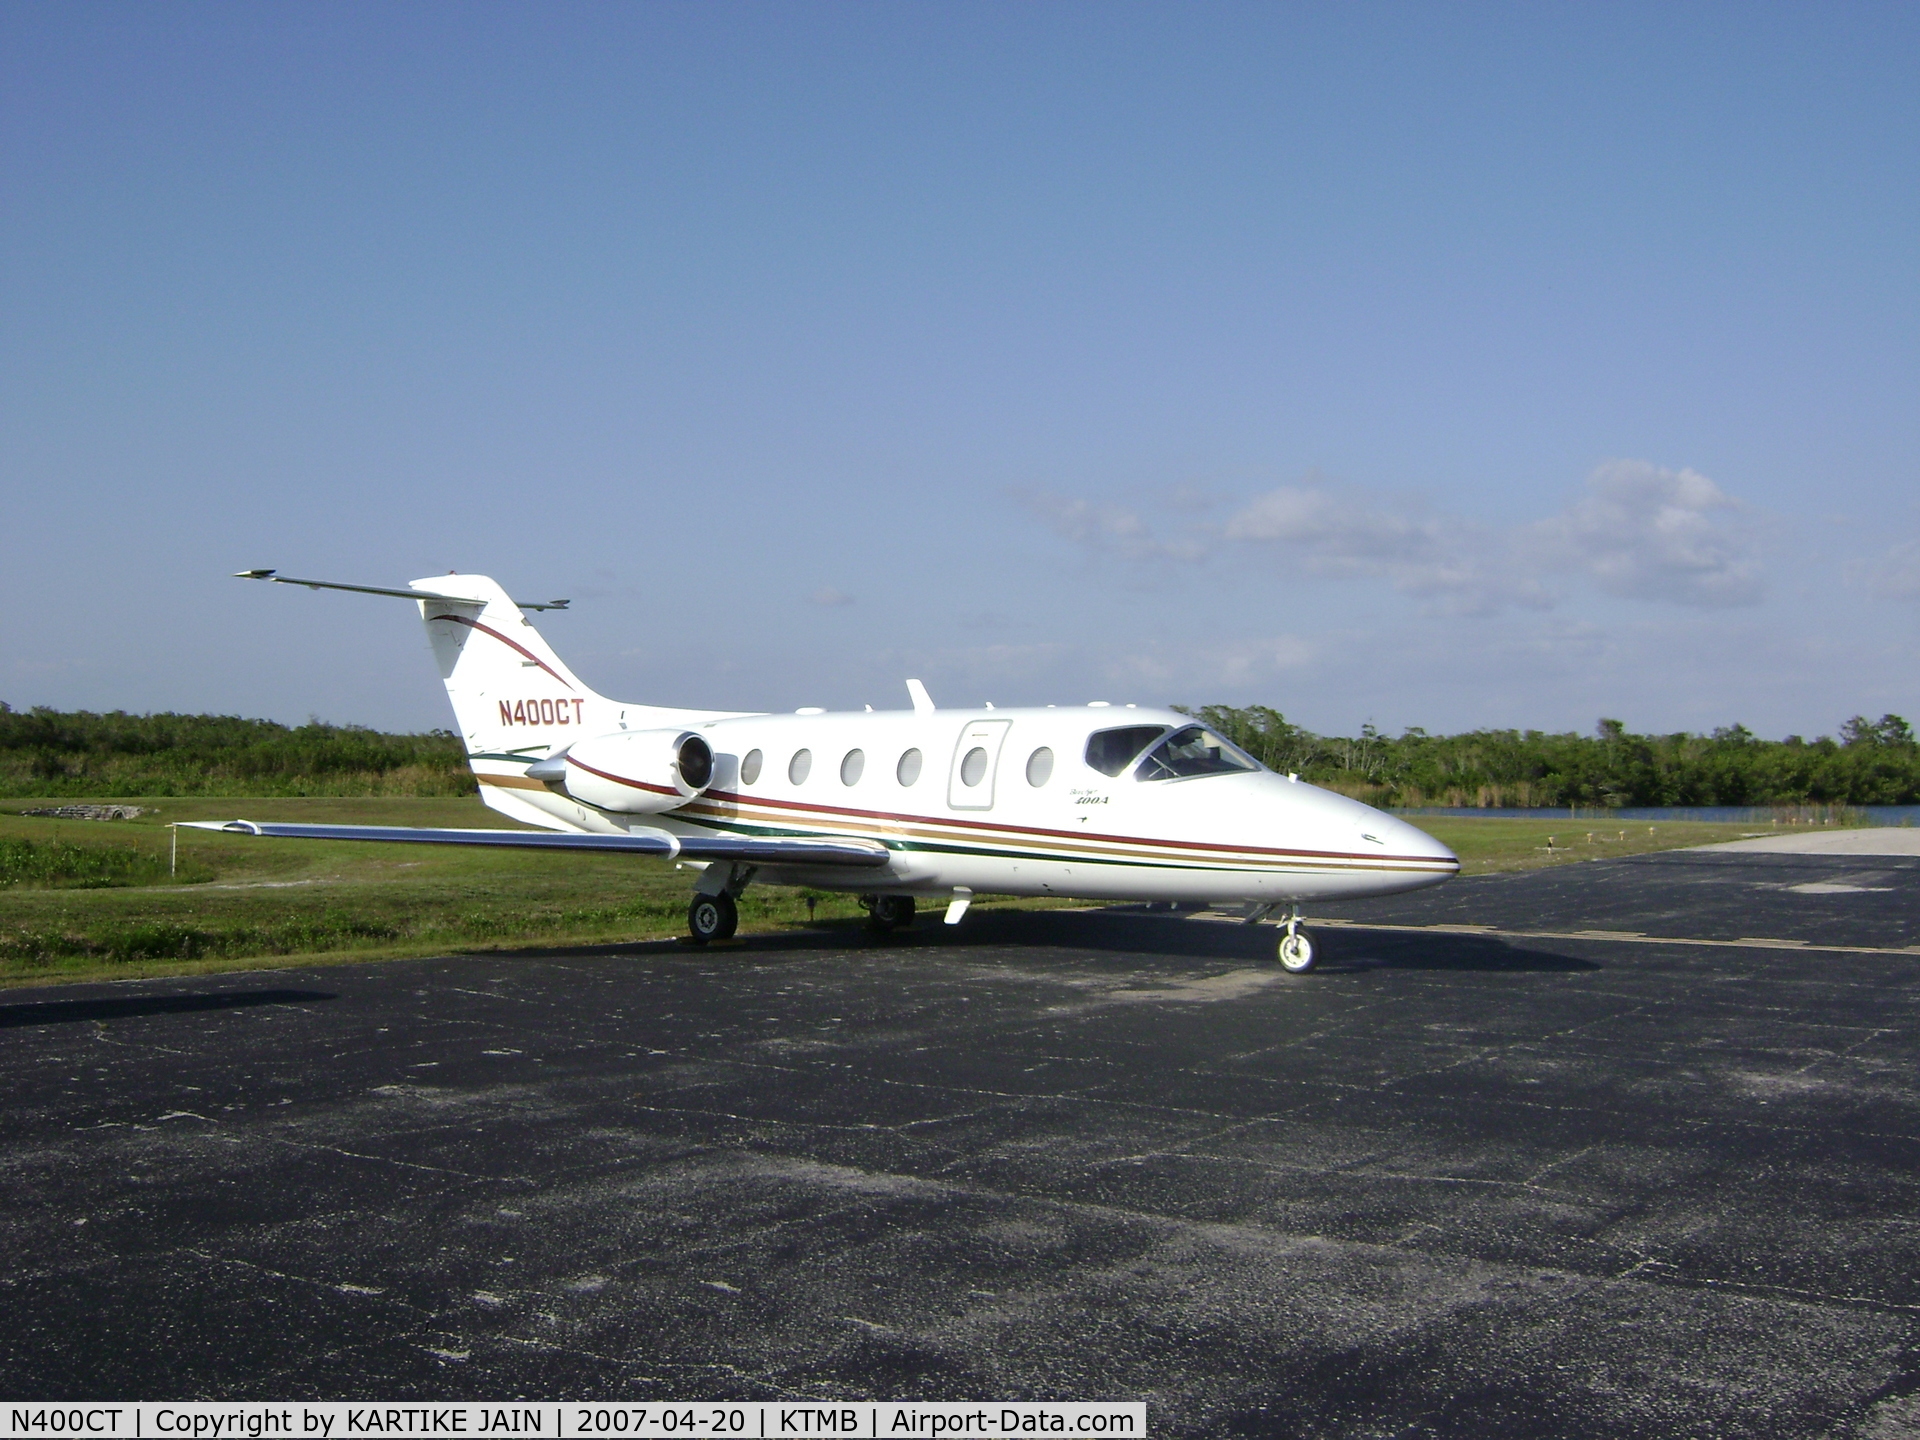 N400CT, 1998 Beechjet 400A C/N RK-179, RAYTHEON JET AT MARCO ISLAND AIRPORT